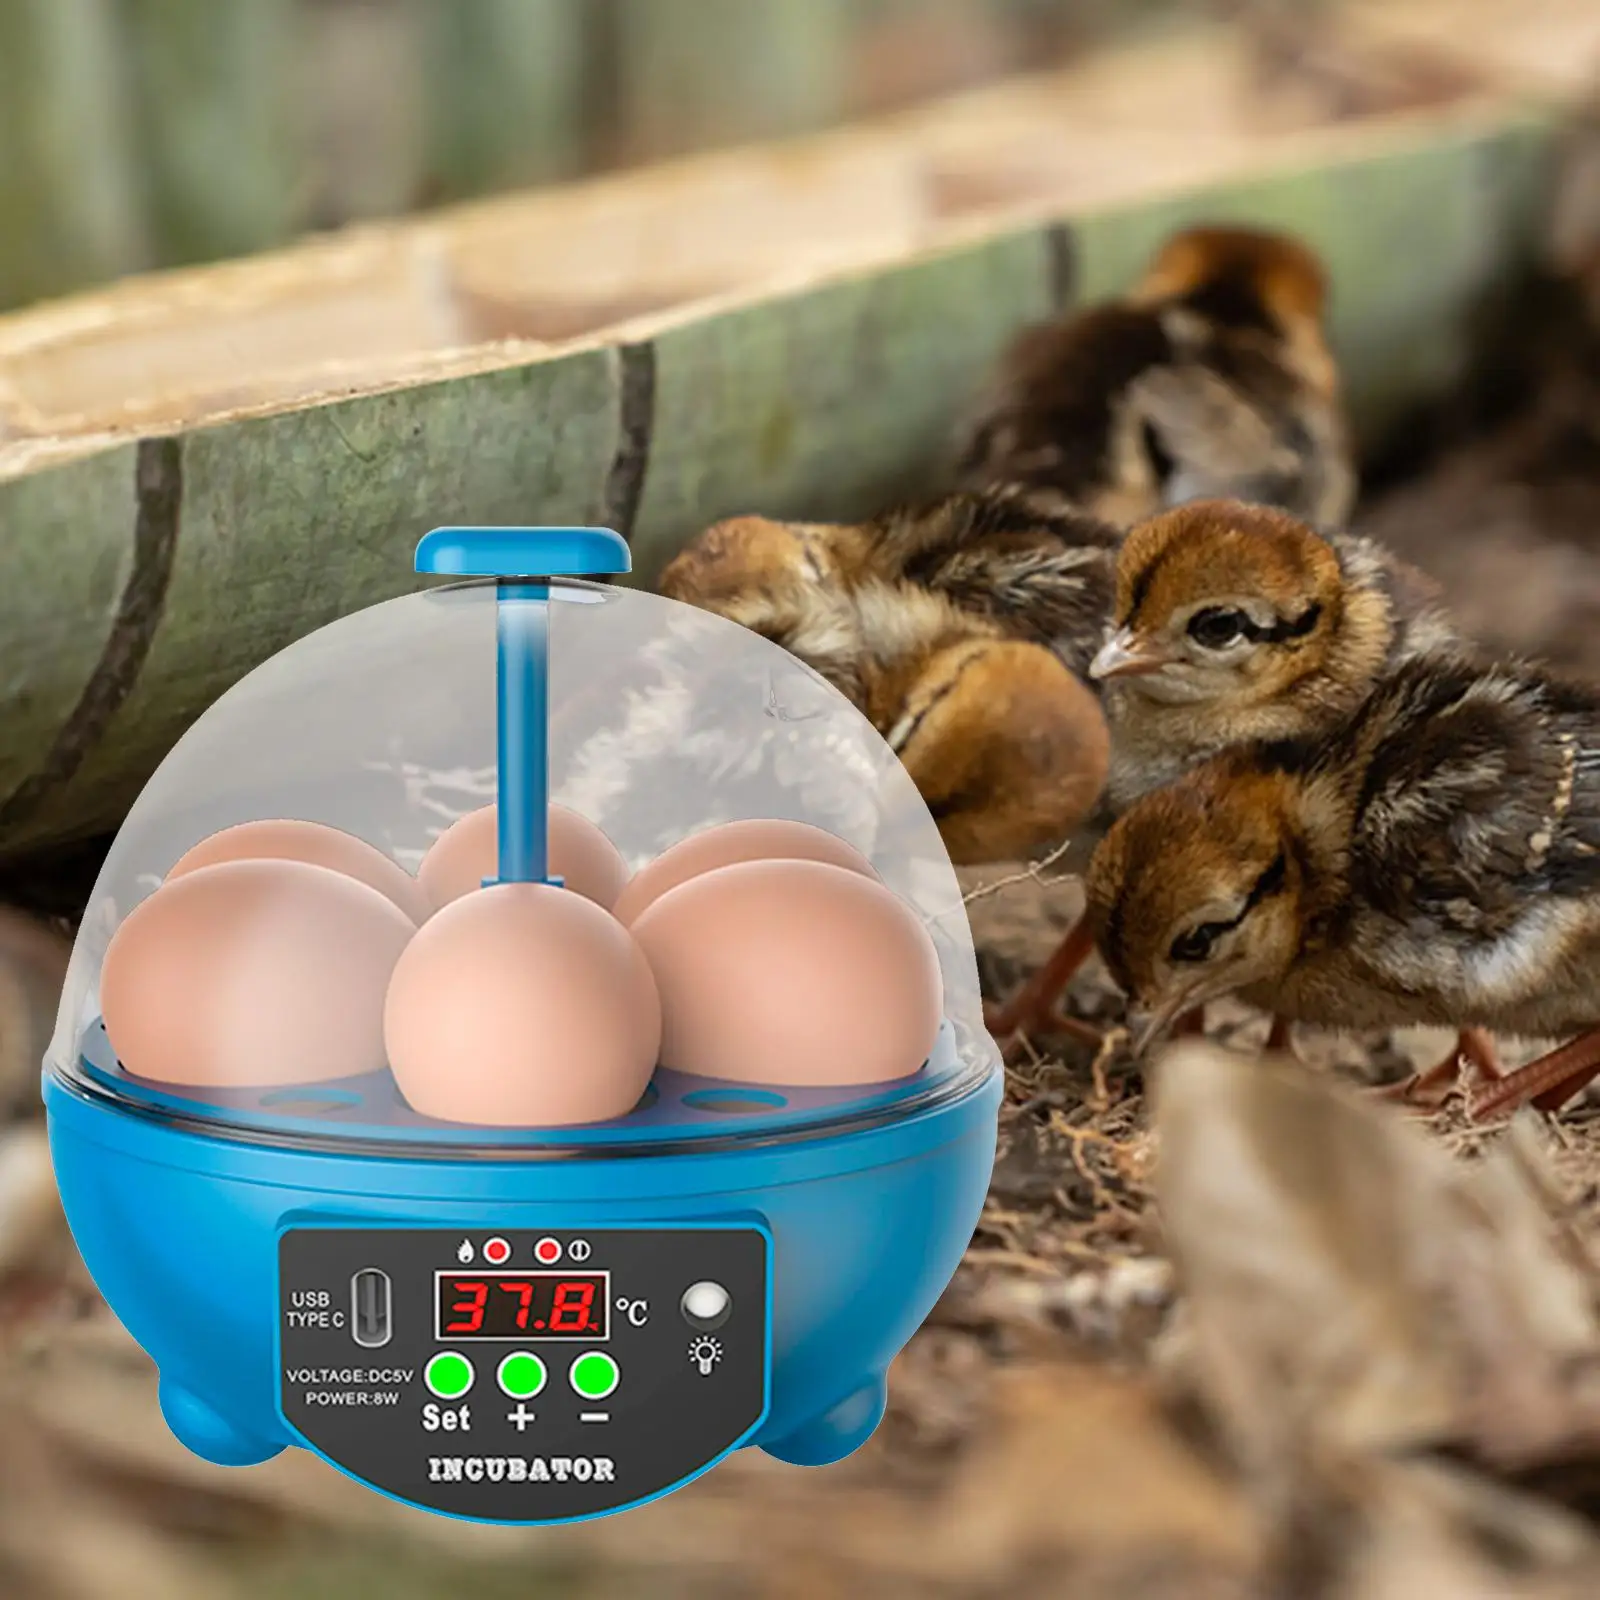 USB Egg Incubator Manual LED Display Temperature Control Hatching Eggs Chicken